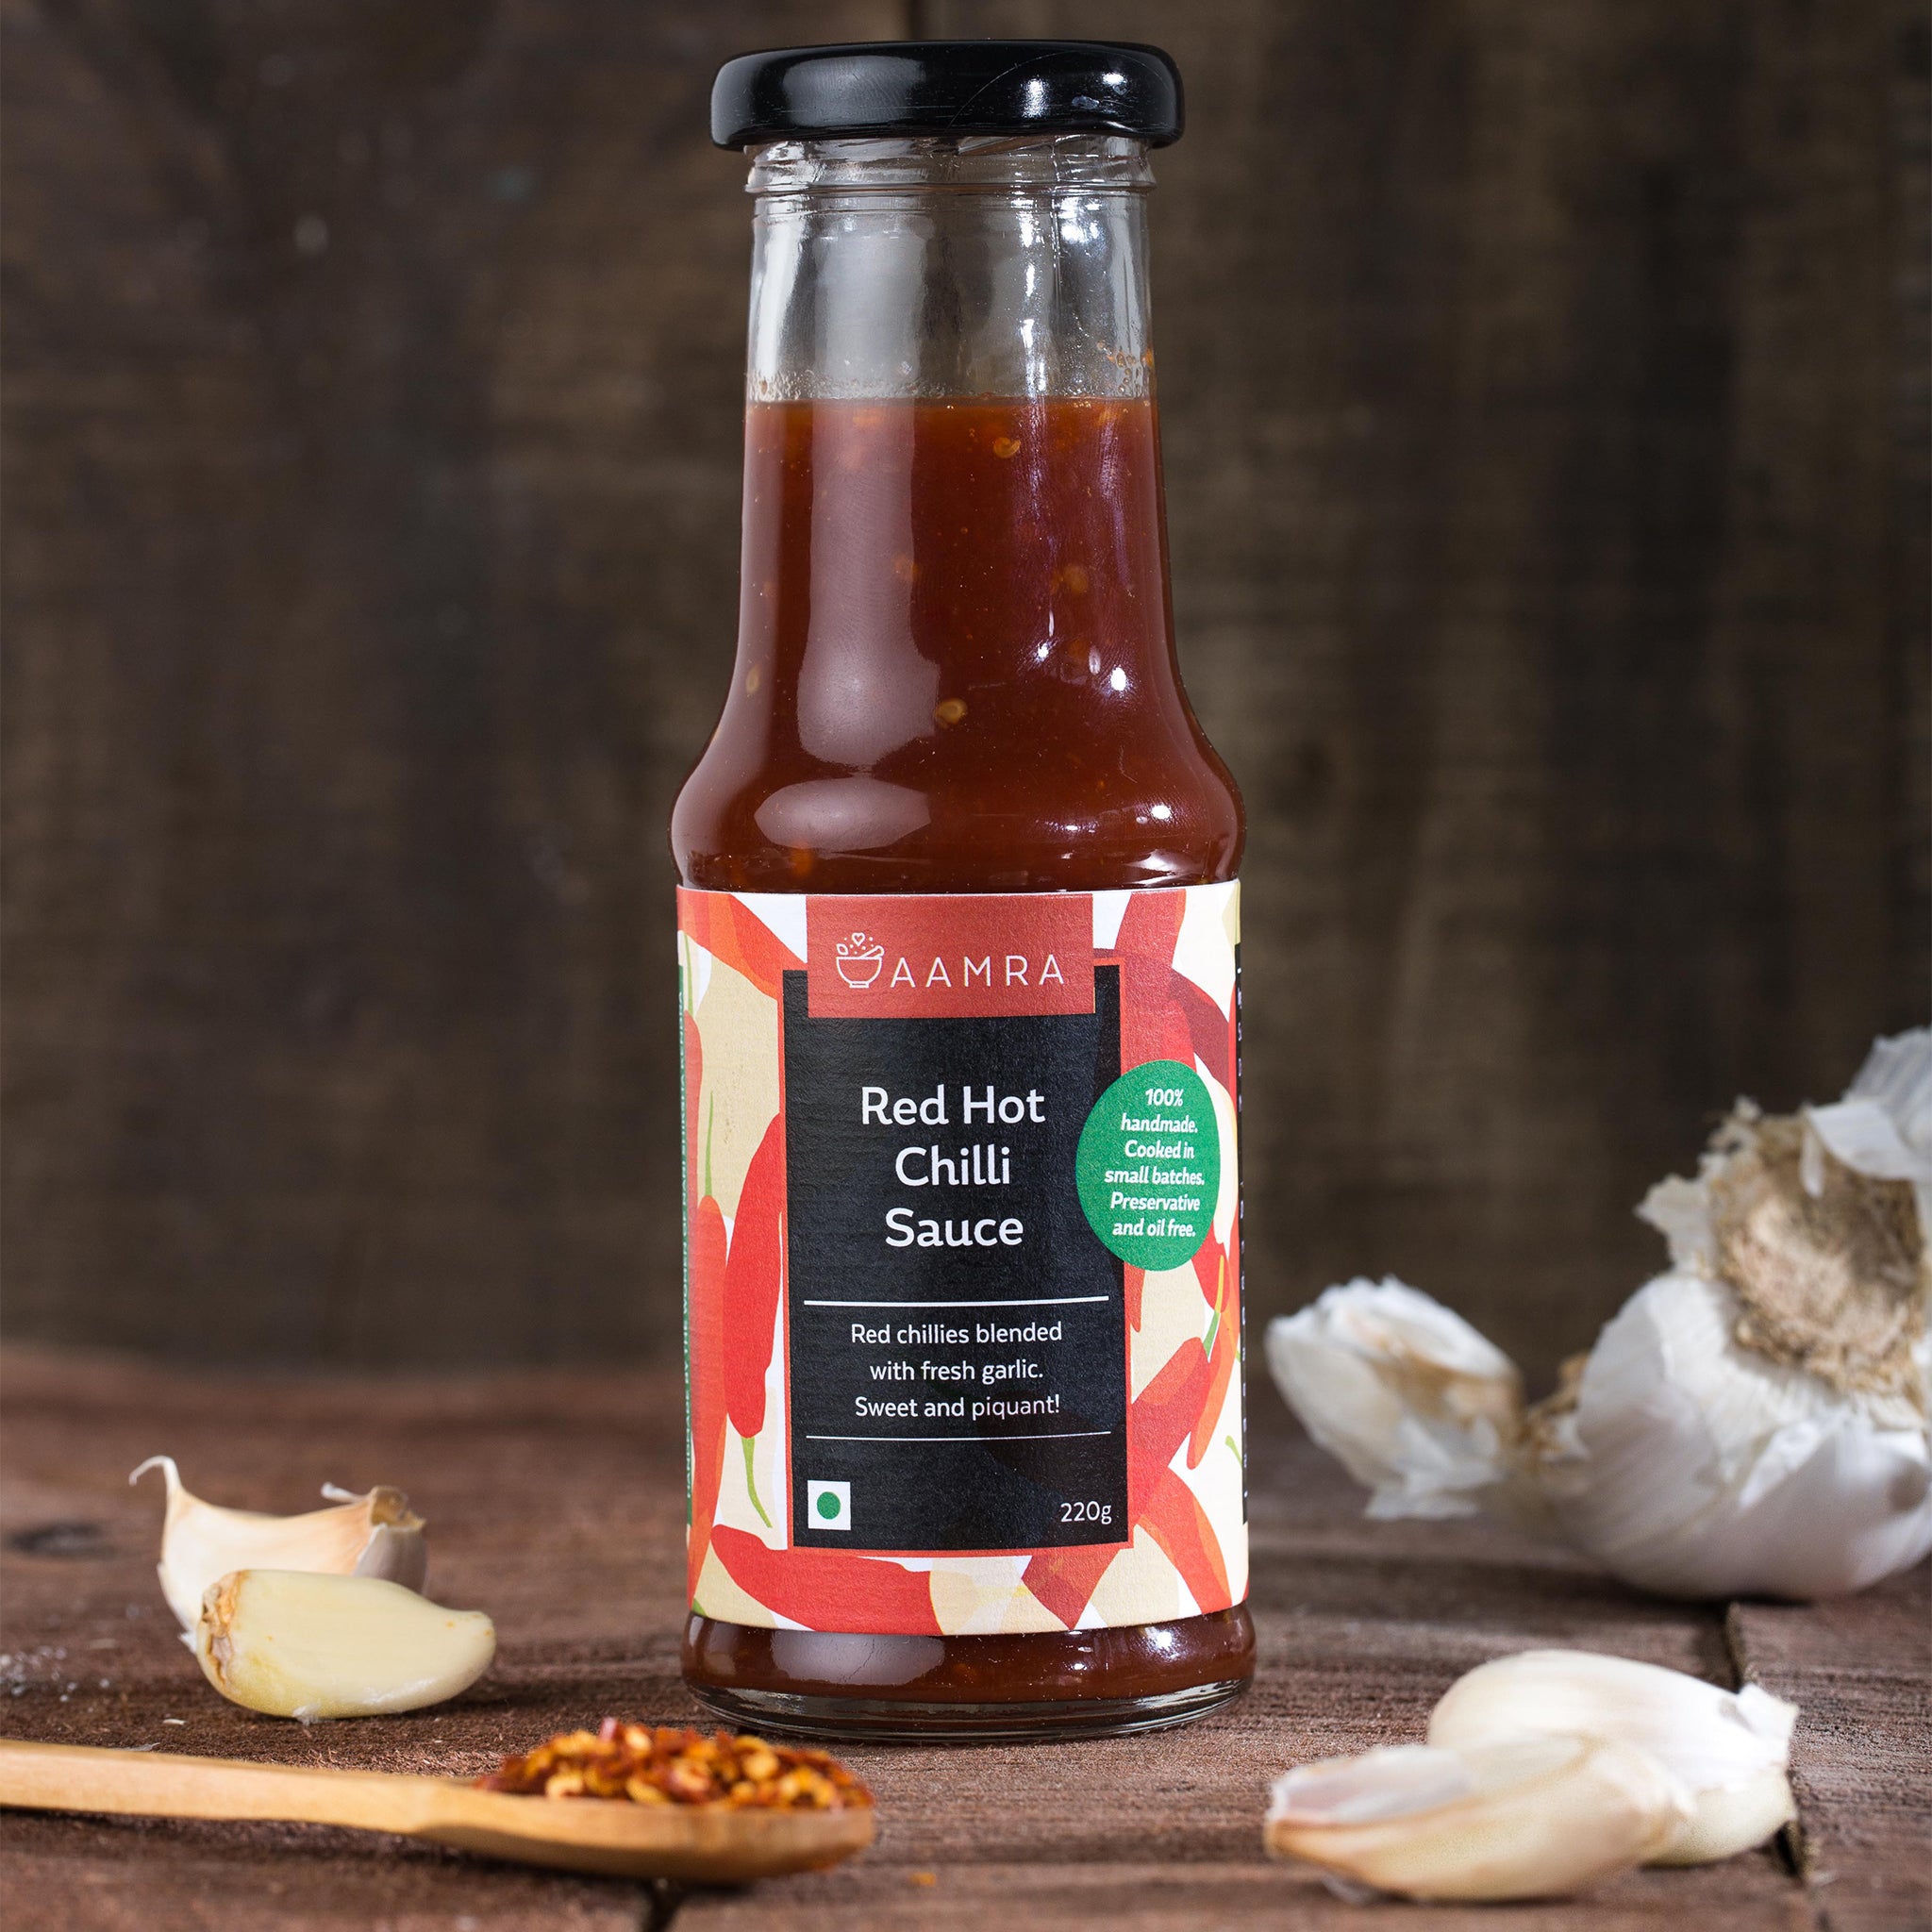 Buy Sauces Online, Red Hot Chilli Sauce